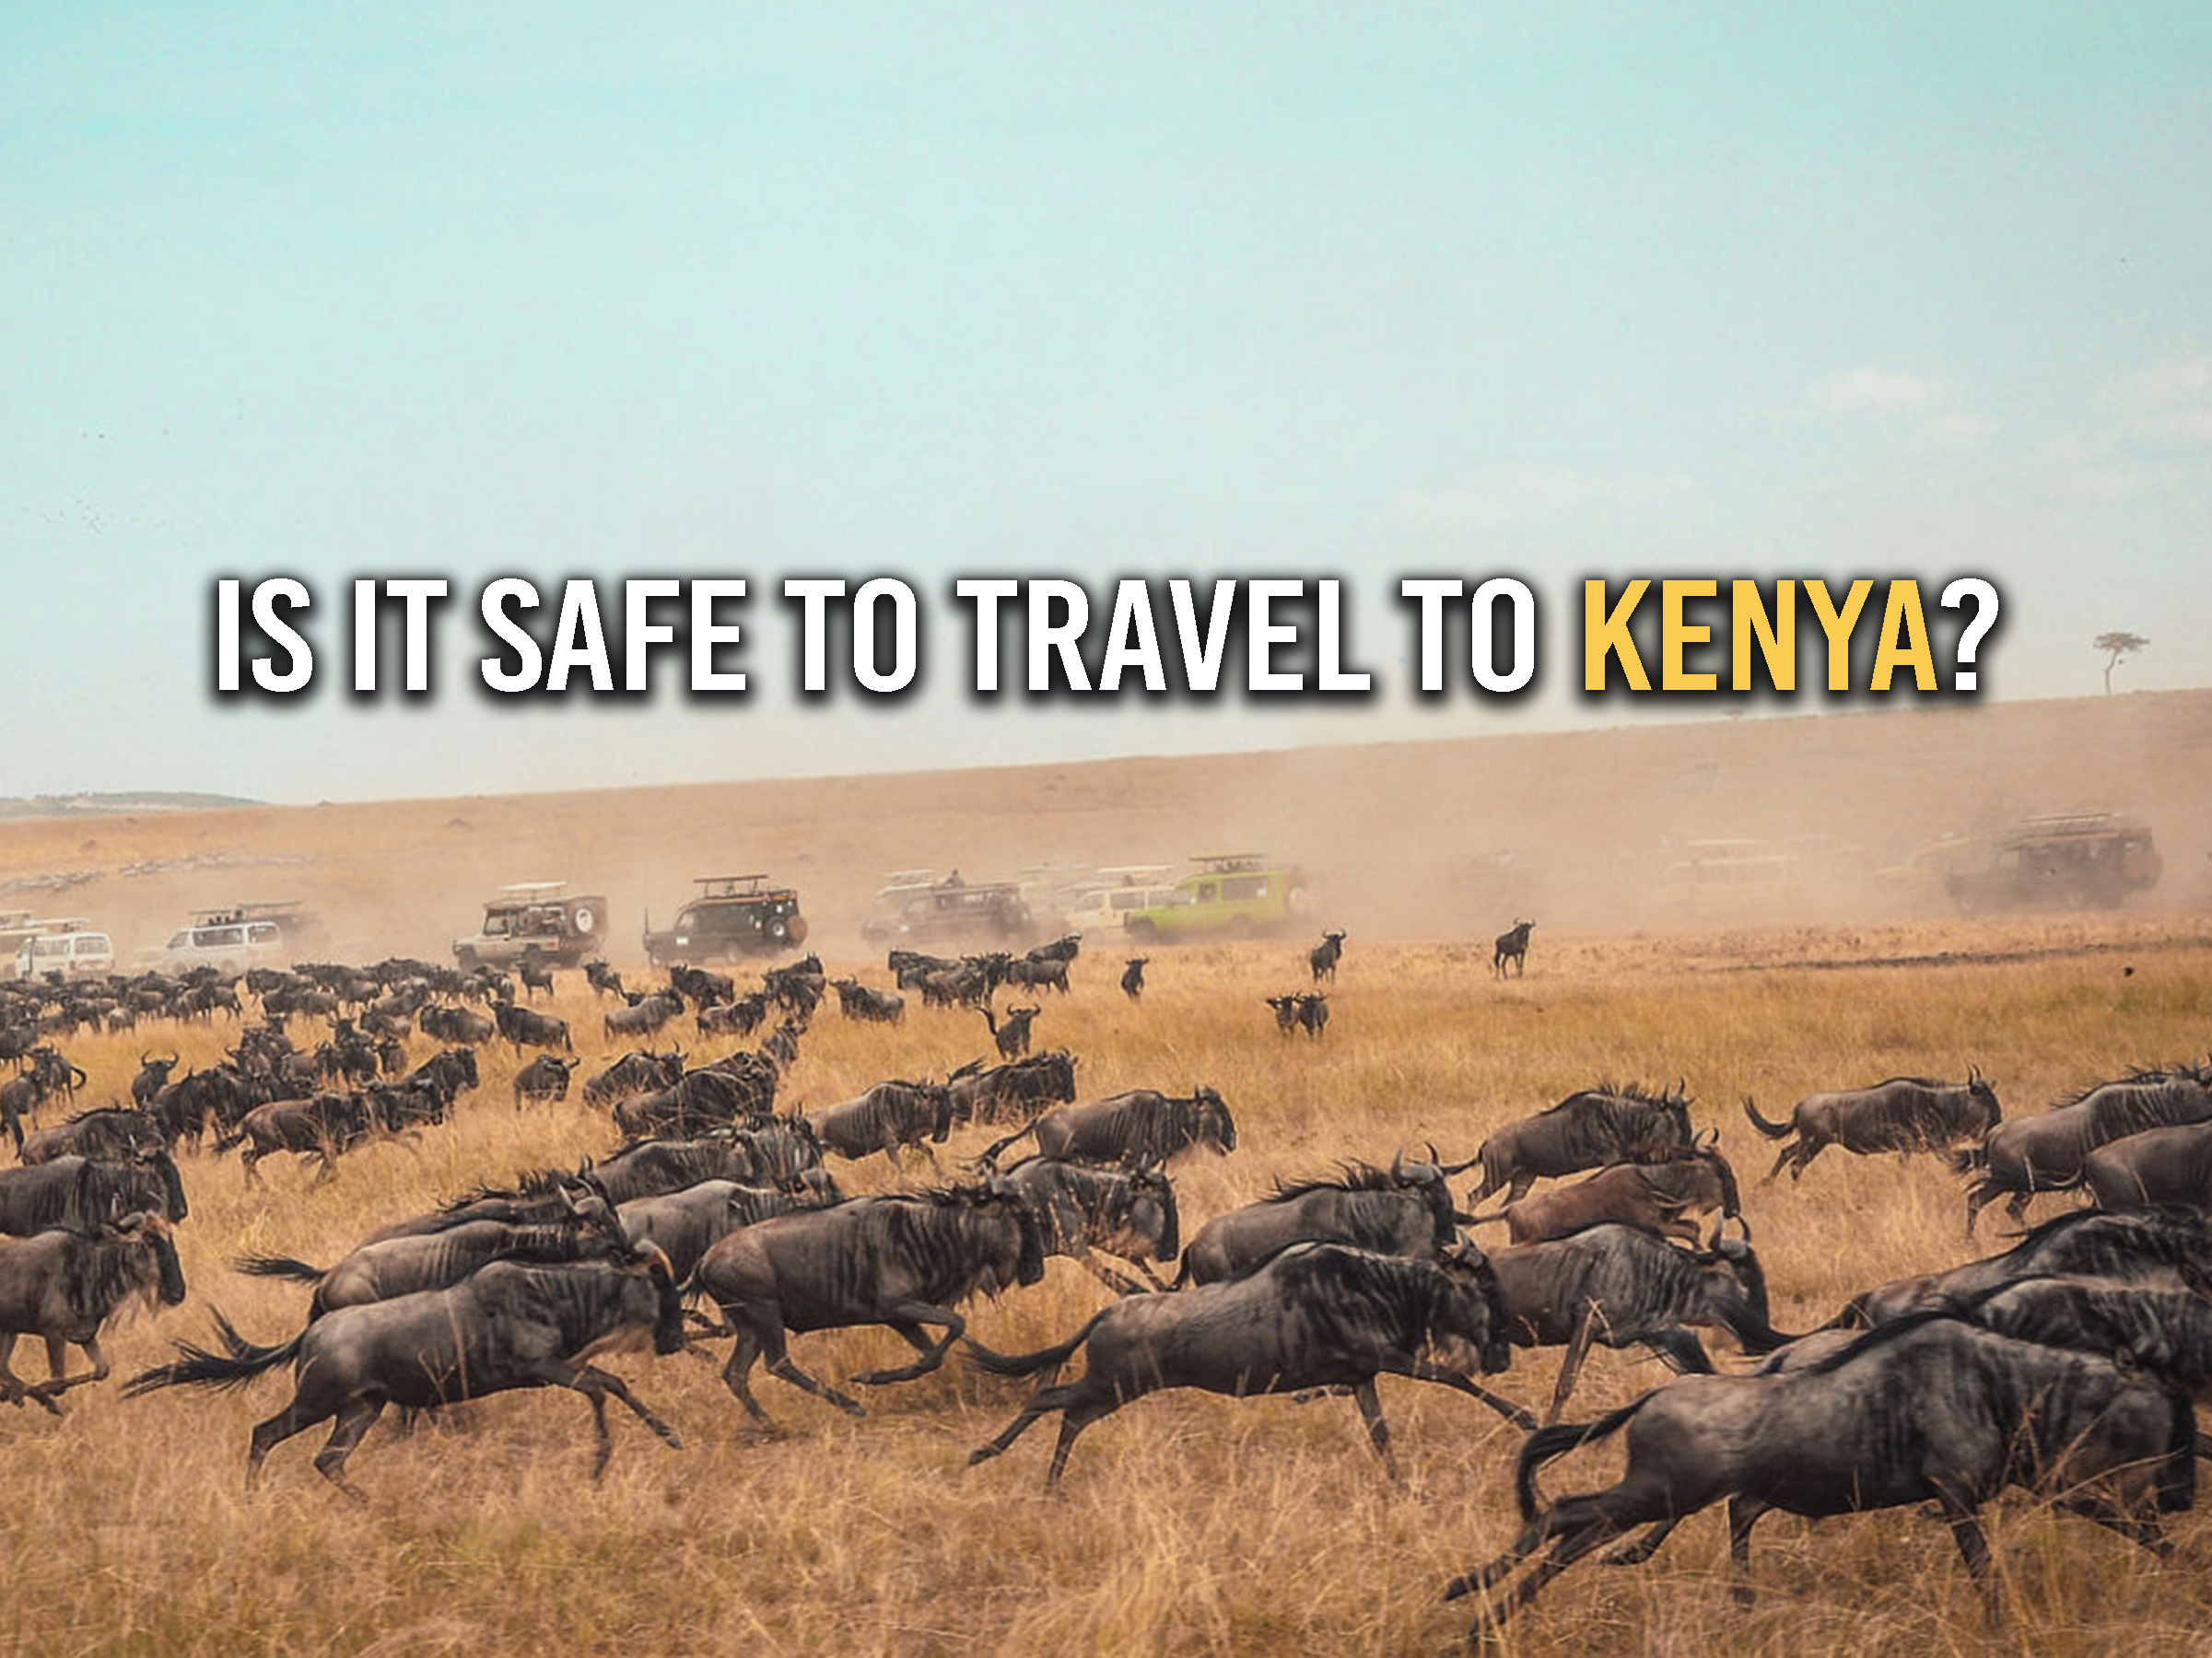 is it safe to travel in kenya right now